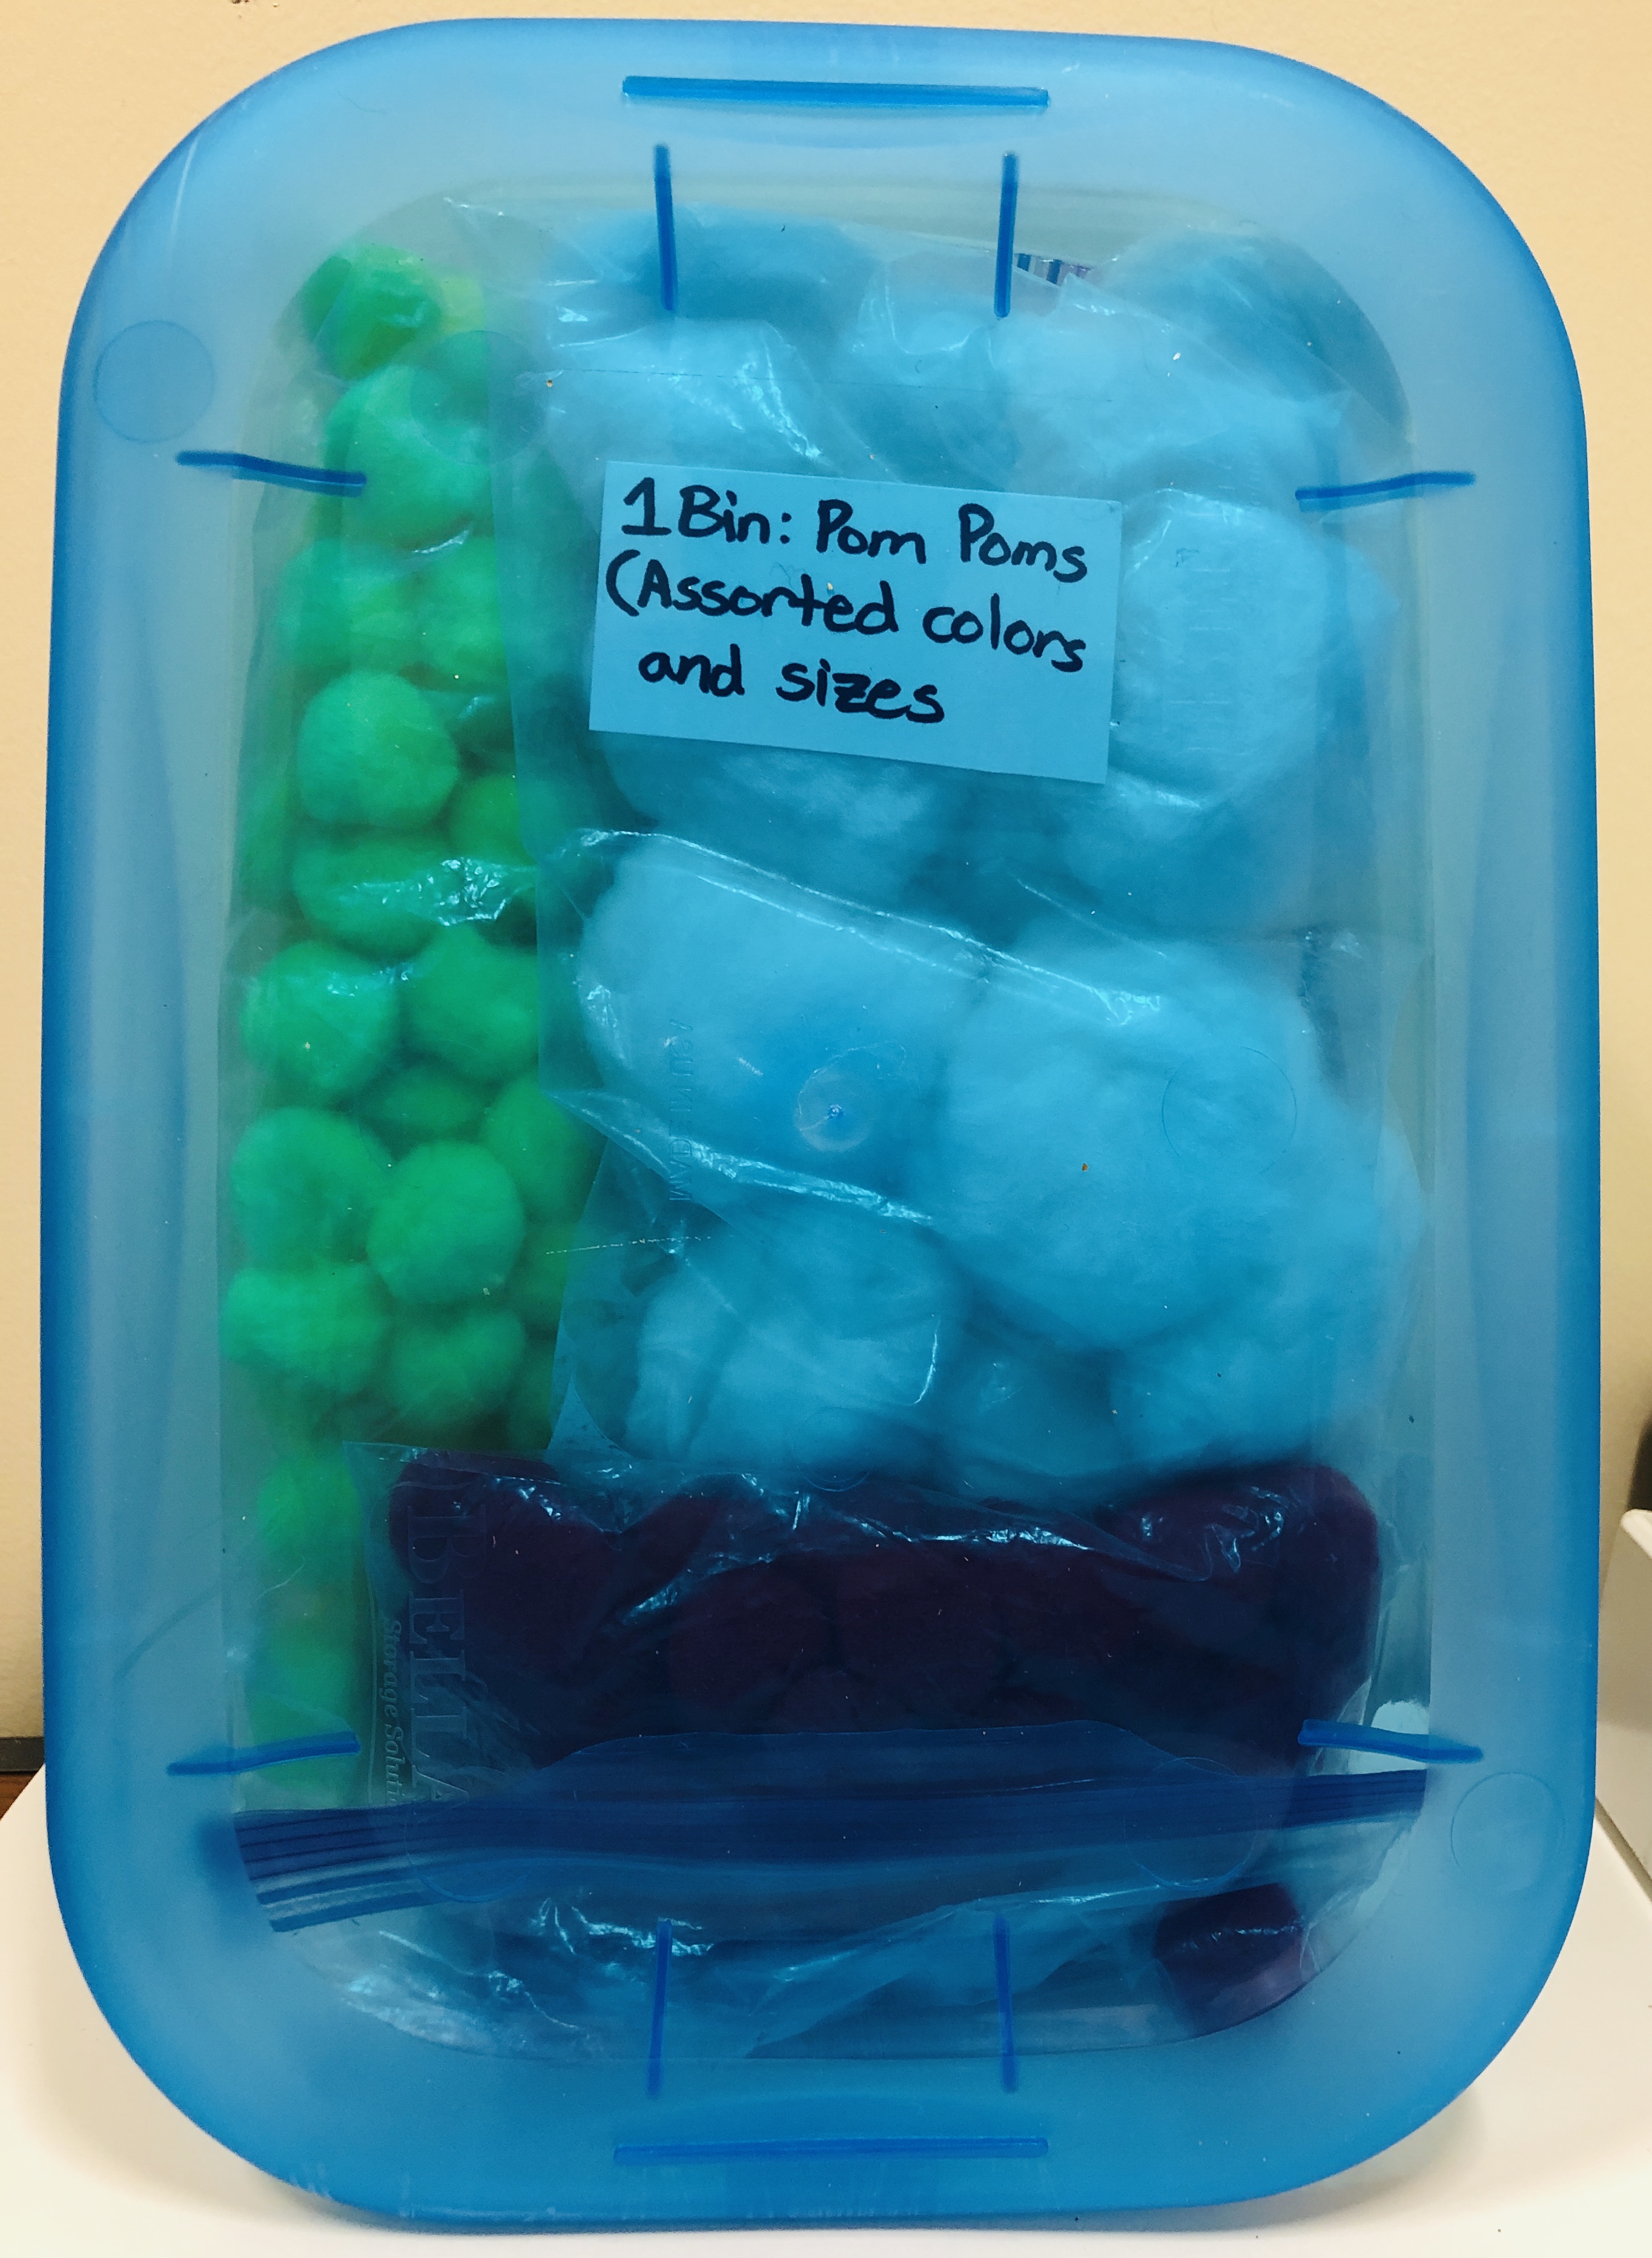 1 bin of pom pom balls (assorted colors and sizes)